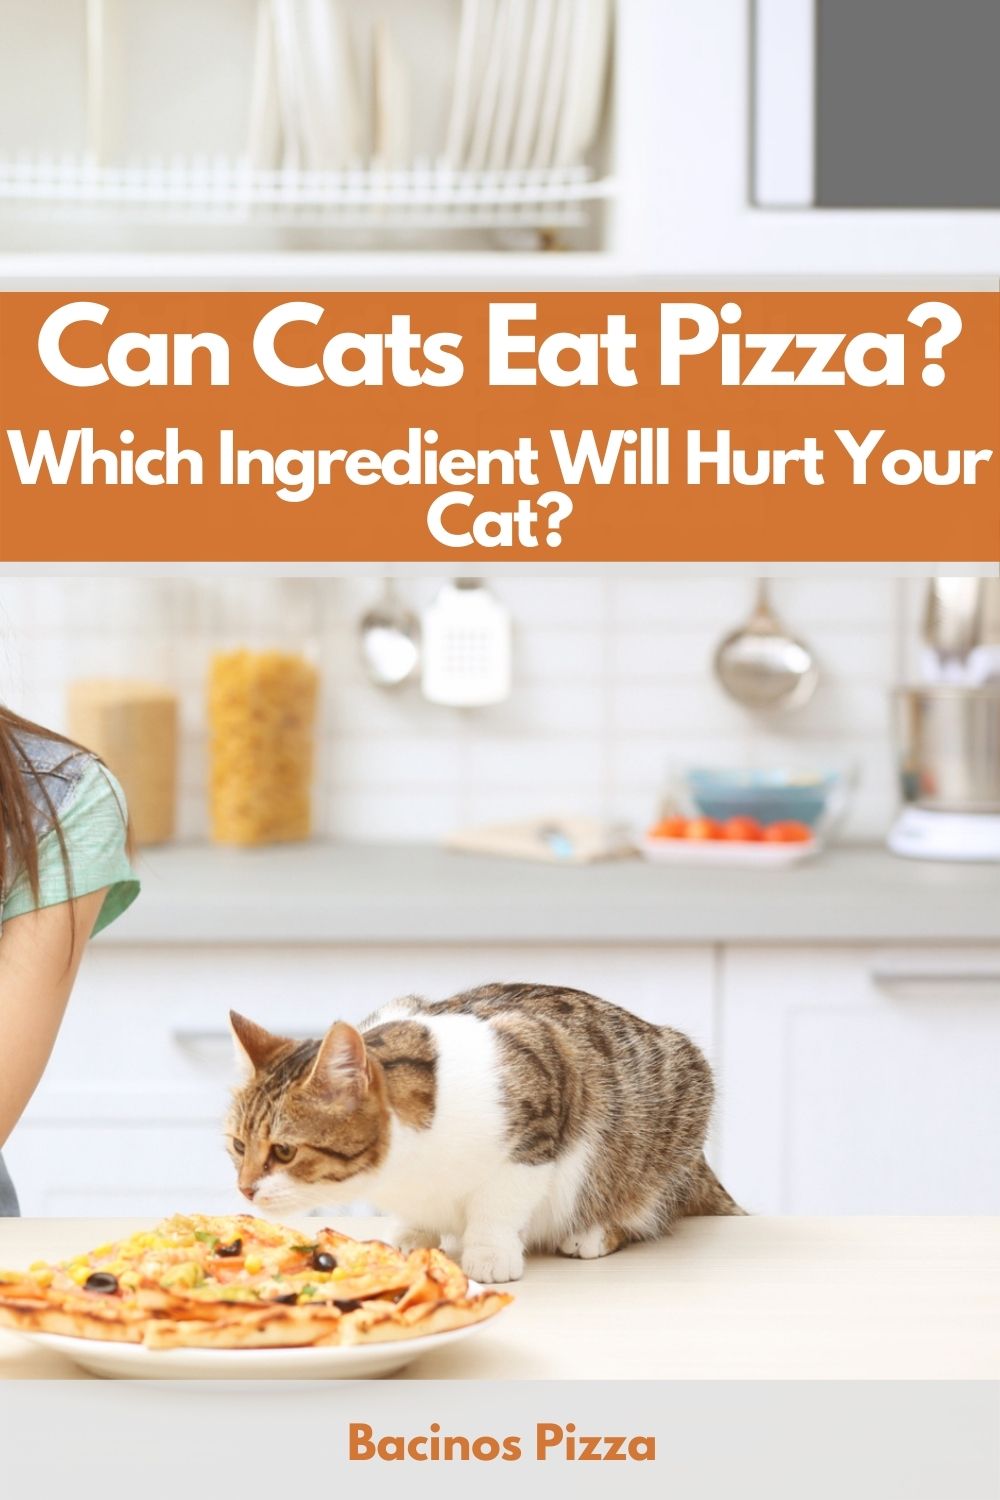 Can Cats Eat Pizza Which Ingredient Will Hurt Your Cat pin 2